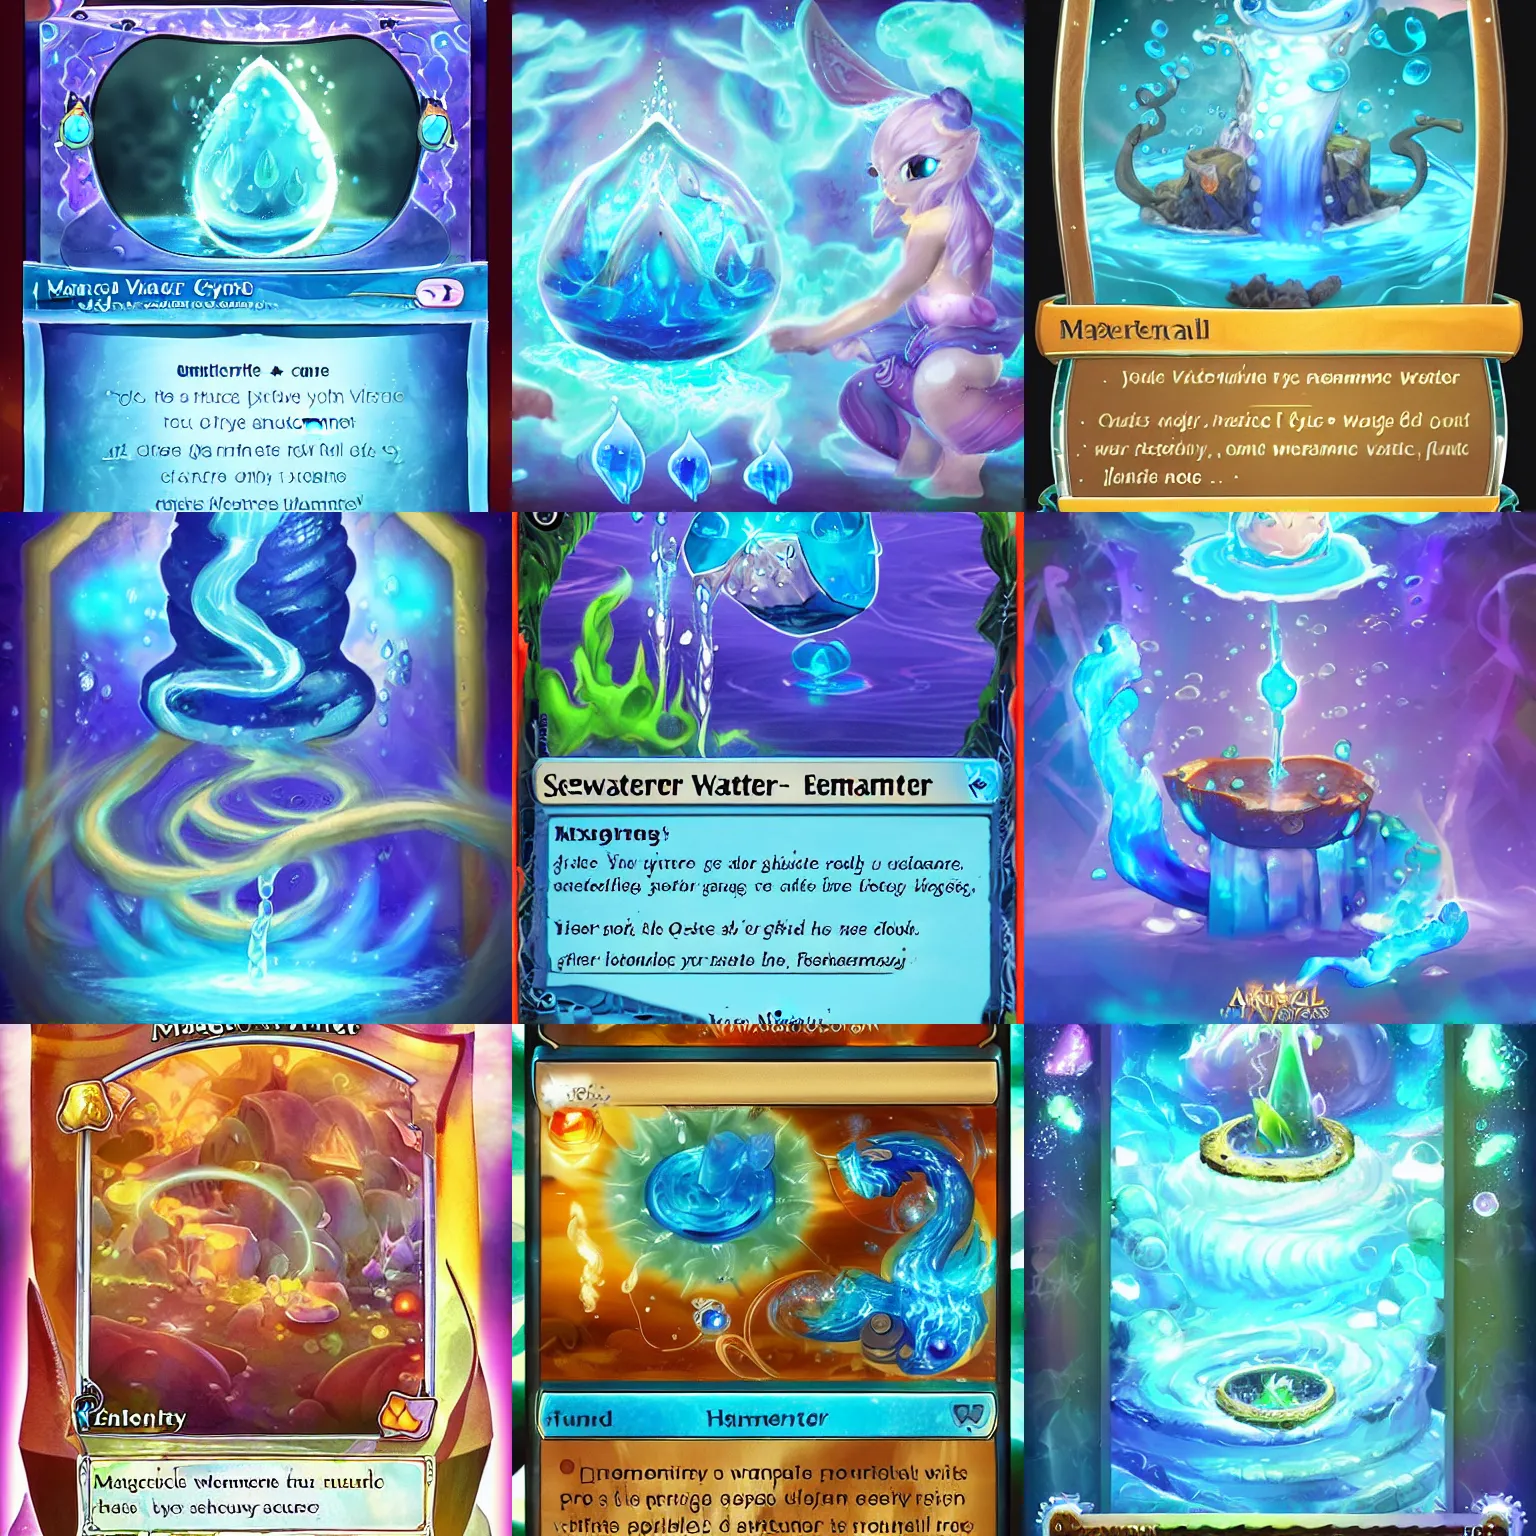 Prompt: magical water elementie of water releases magical fluid vibes, by axie infinity card style, concept art